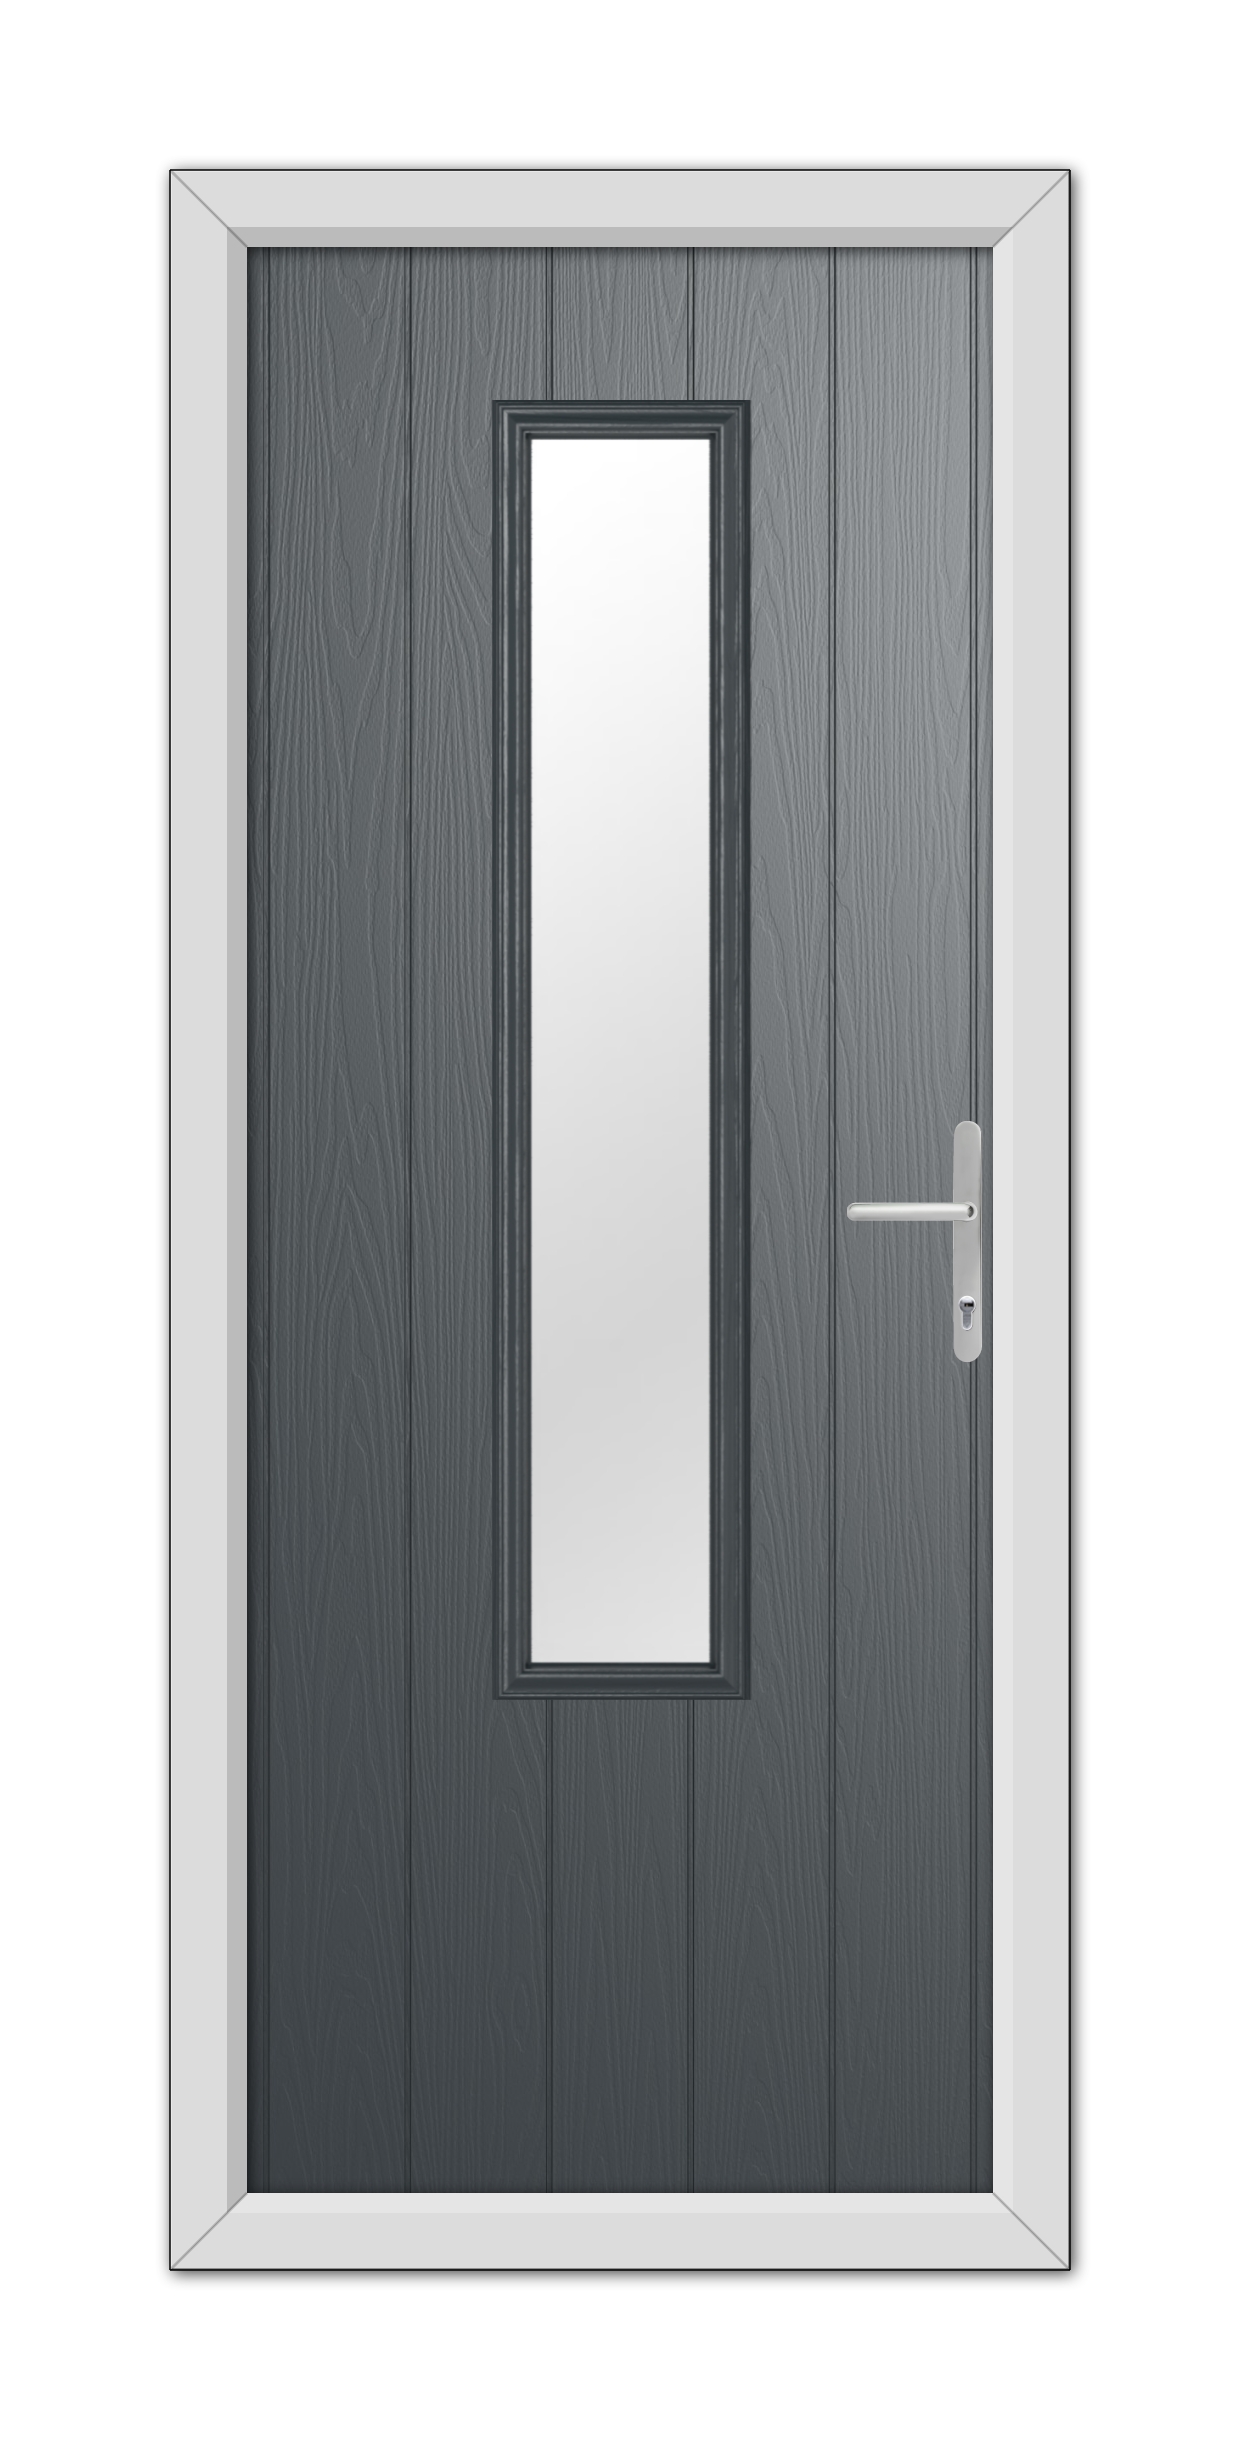 A modern Anthracite Grey Abercorn Composite Door 48mm Timber Core with a vertical, rectangular window and a white handle, set within a simple white frame.